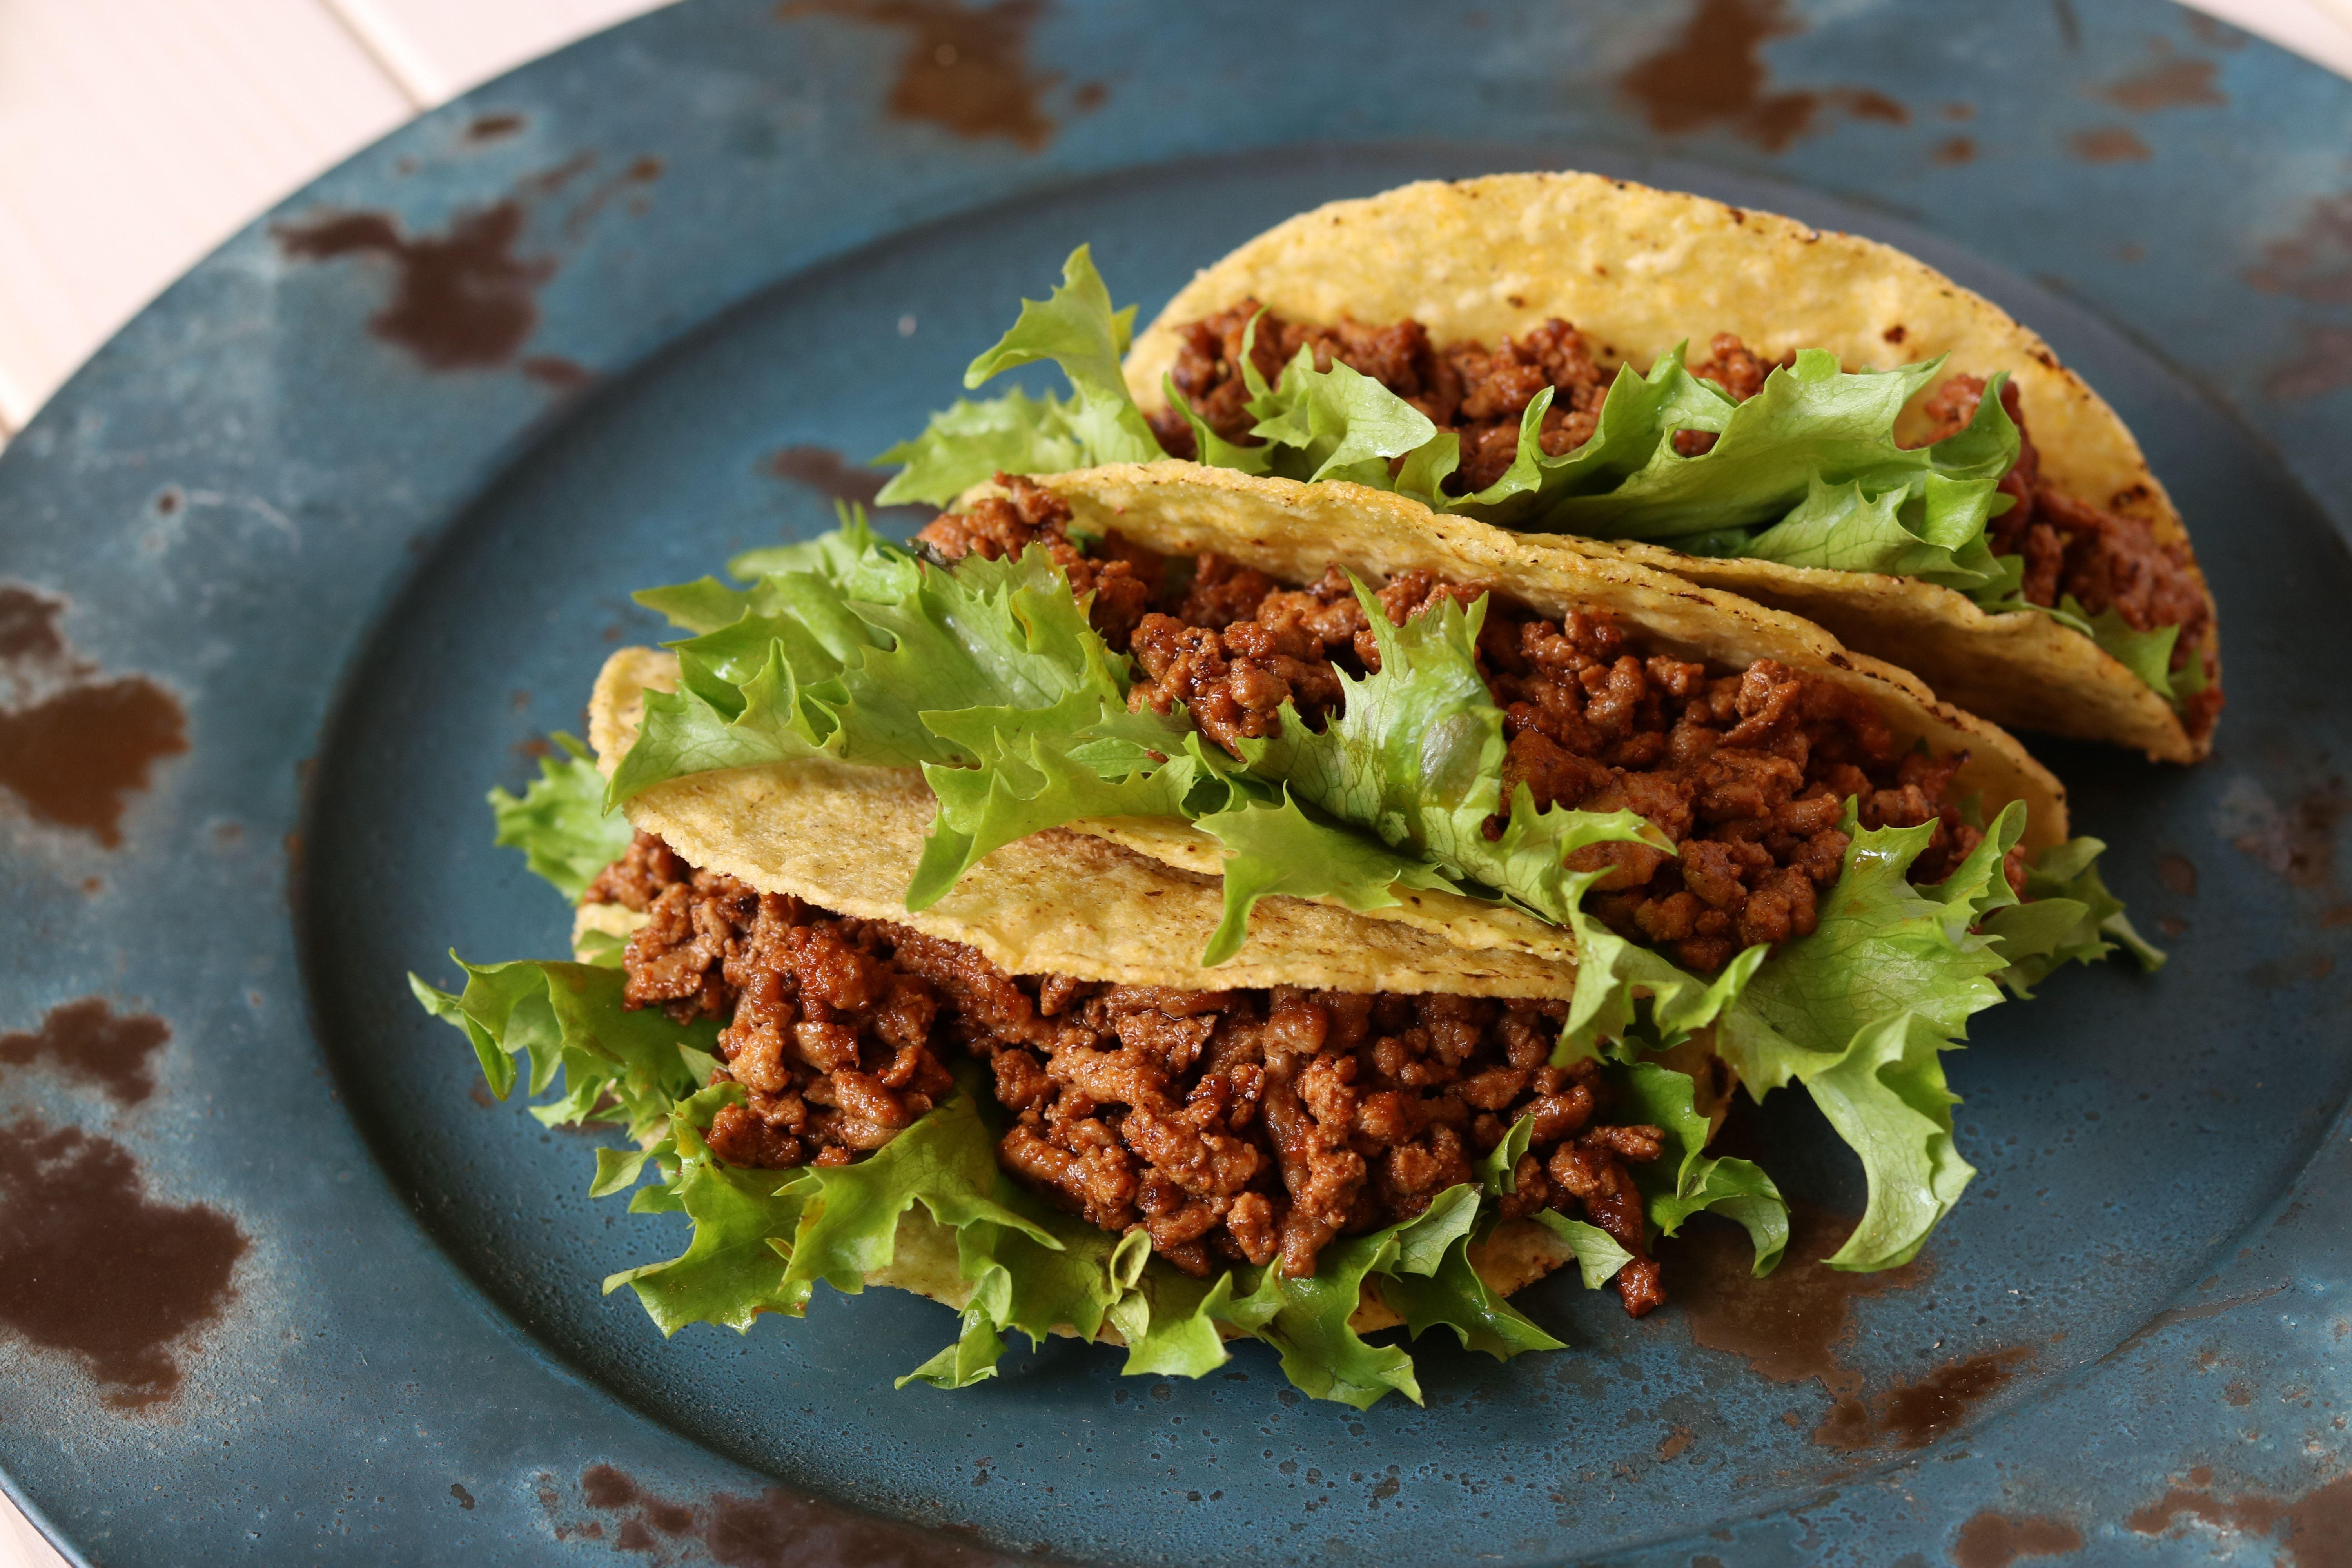 Taco, Beef, Mexican, Food, mexican food, food and drink free image